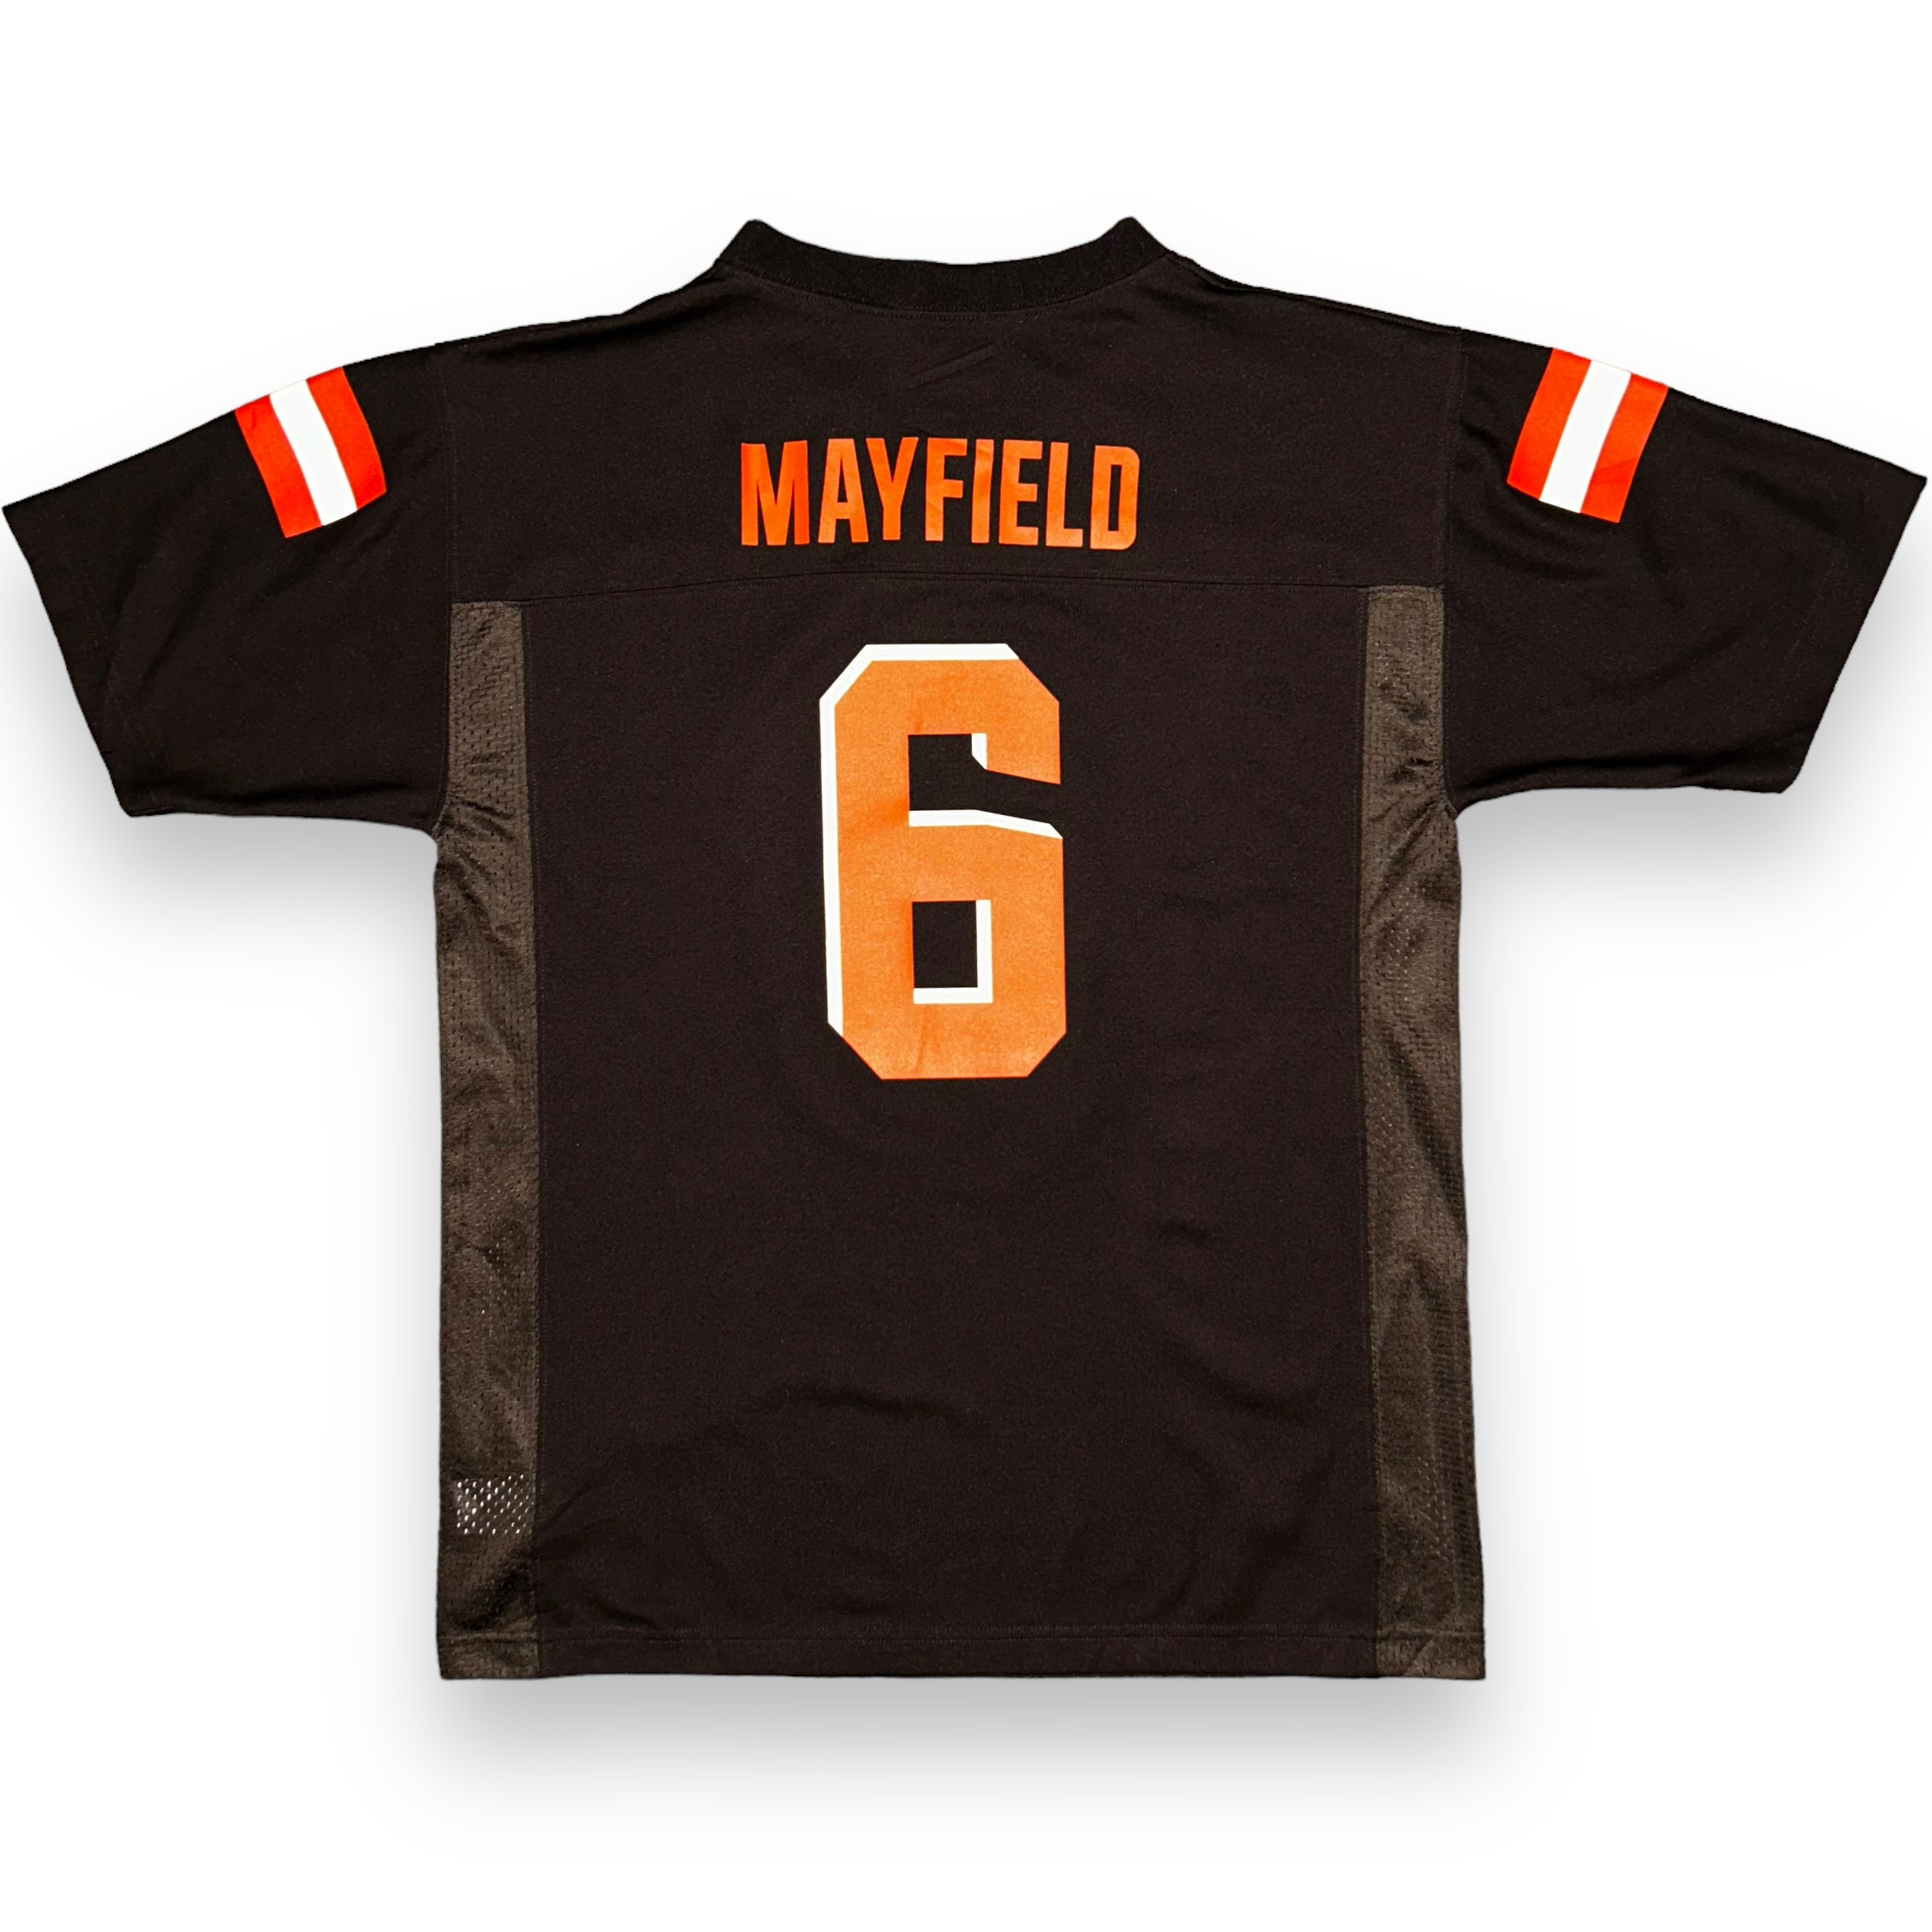 Jersey Cleveland Brown NFL  (S/M)